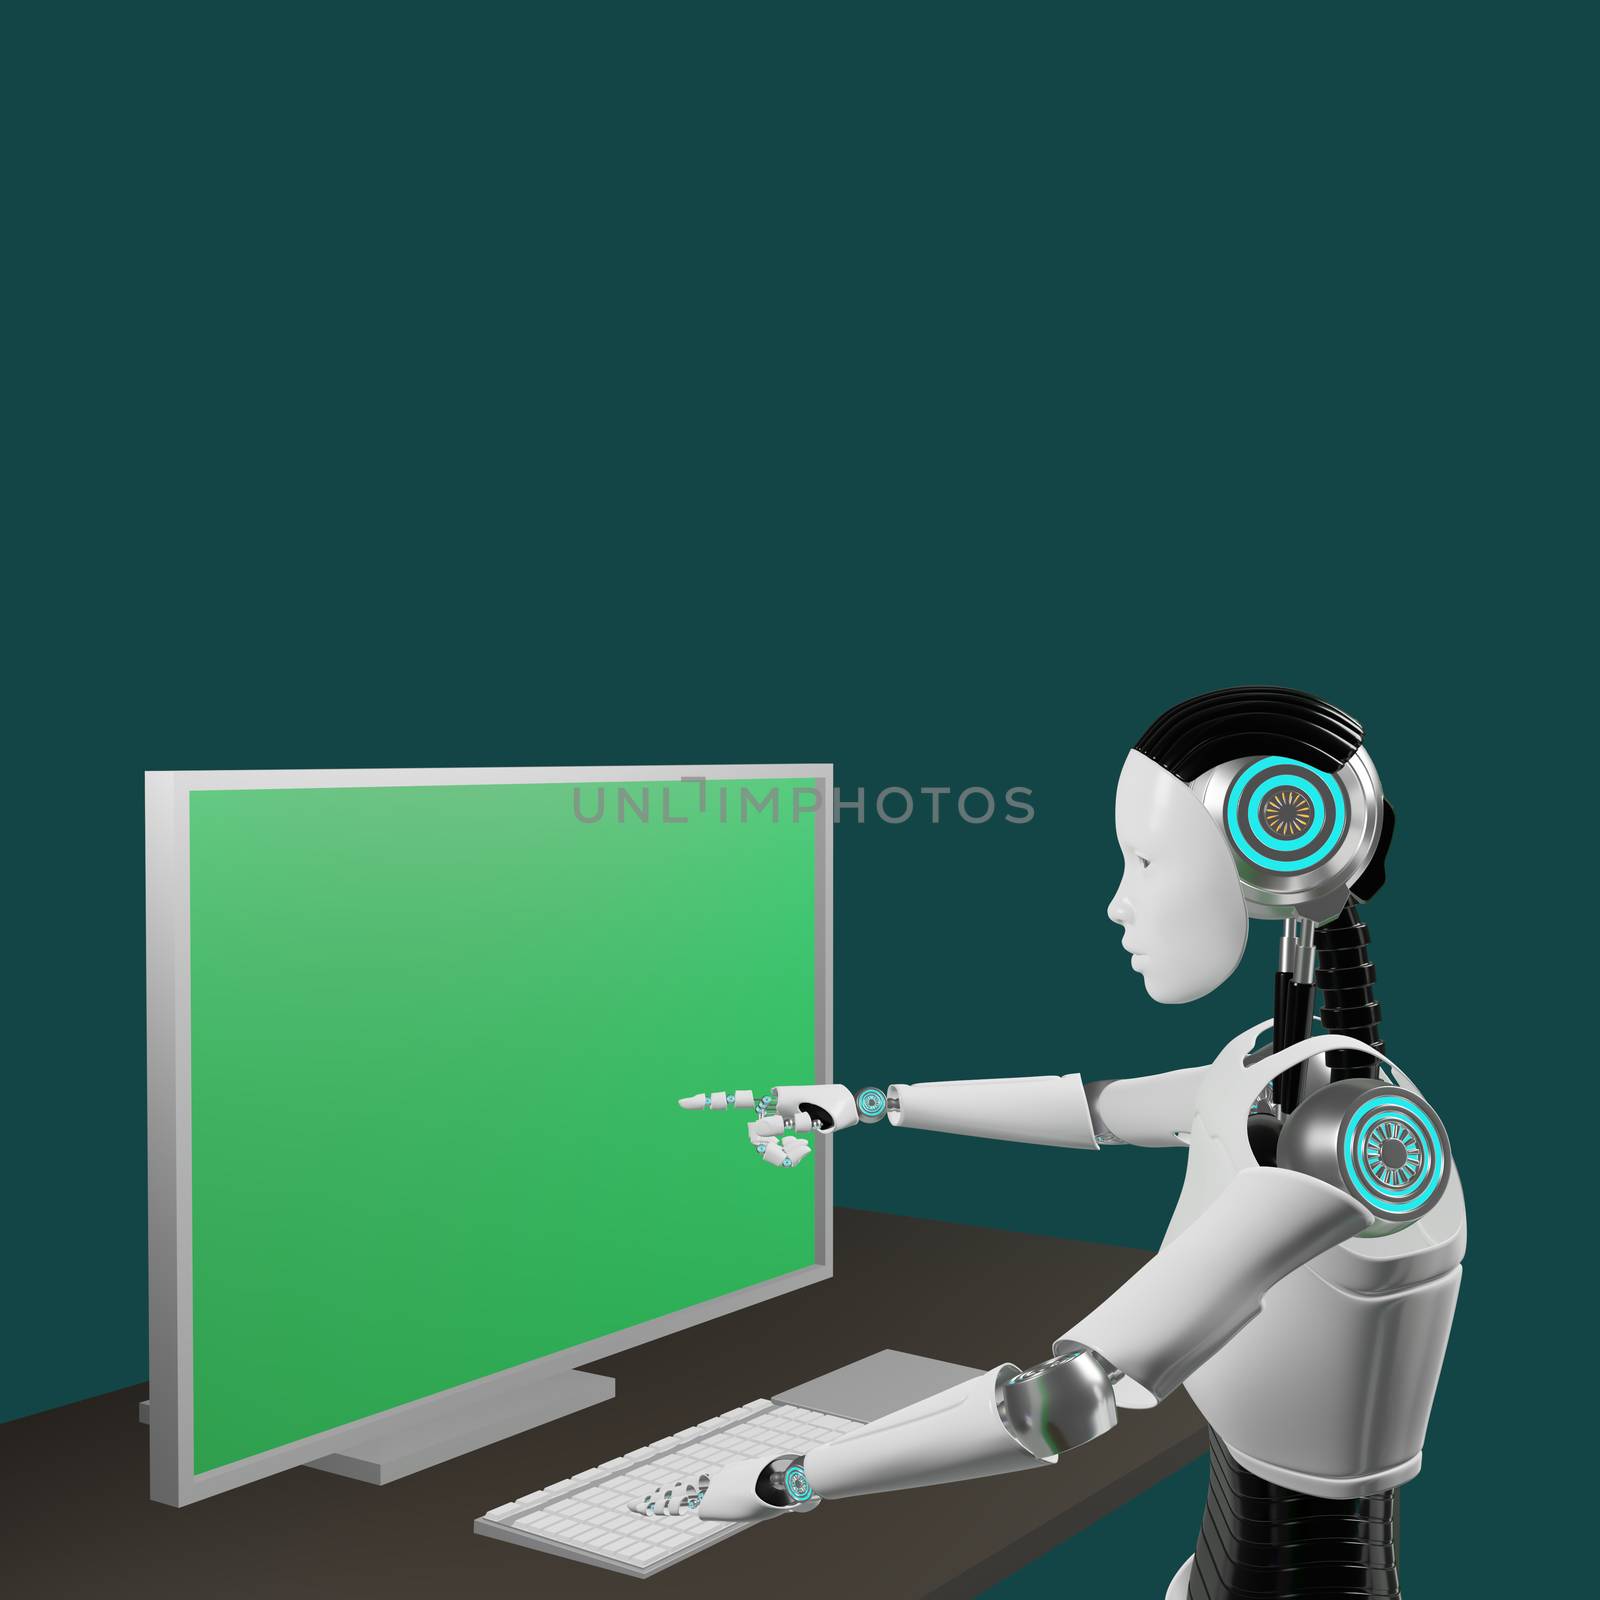 Android is pointing at monitor of computer with green screen by eaglesky